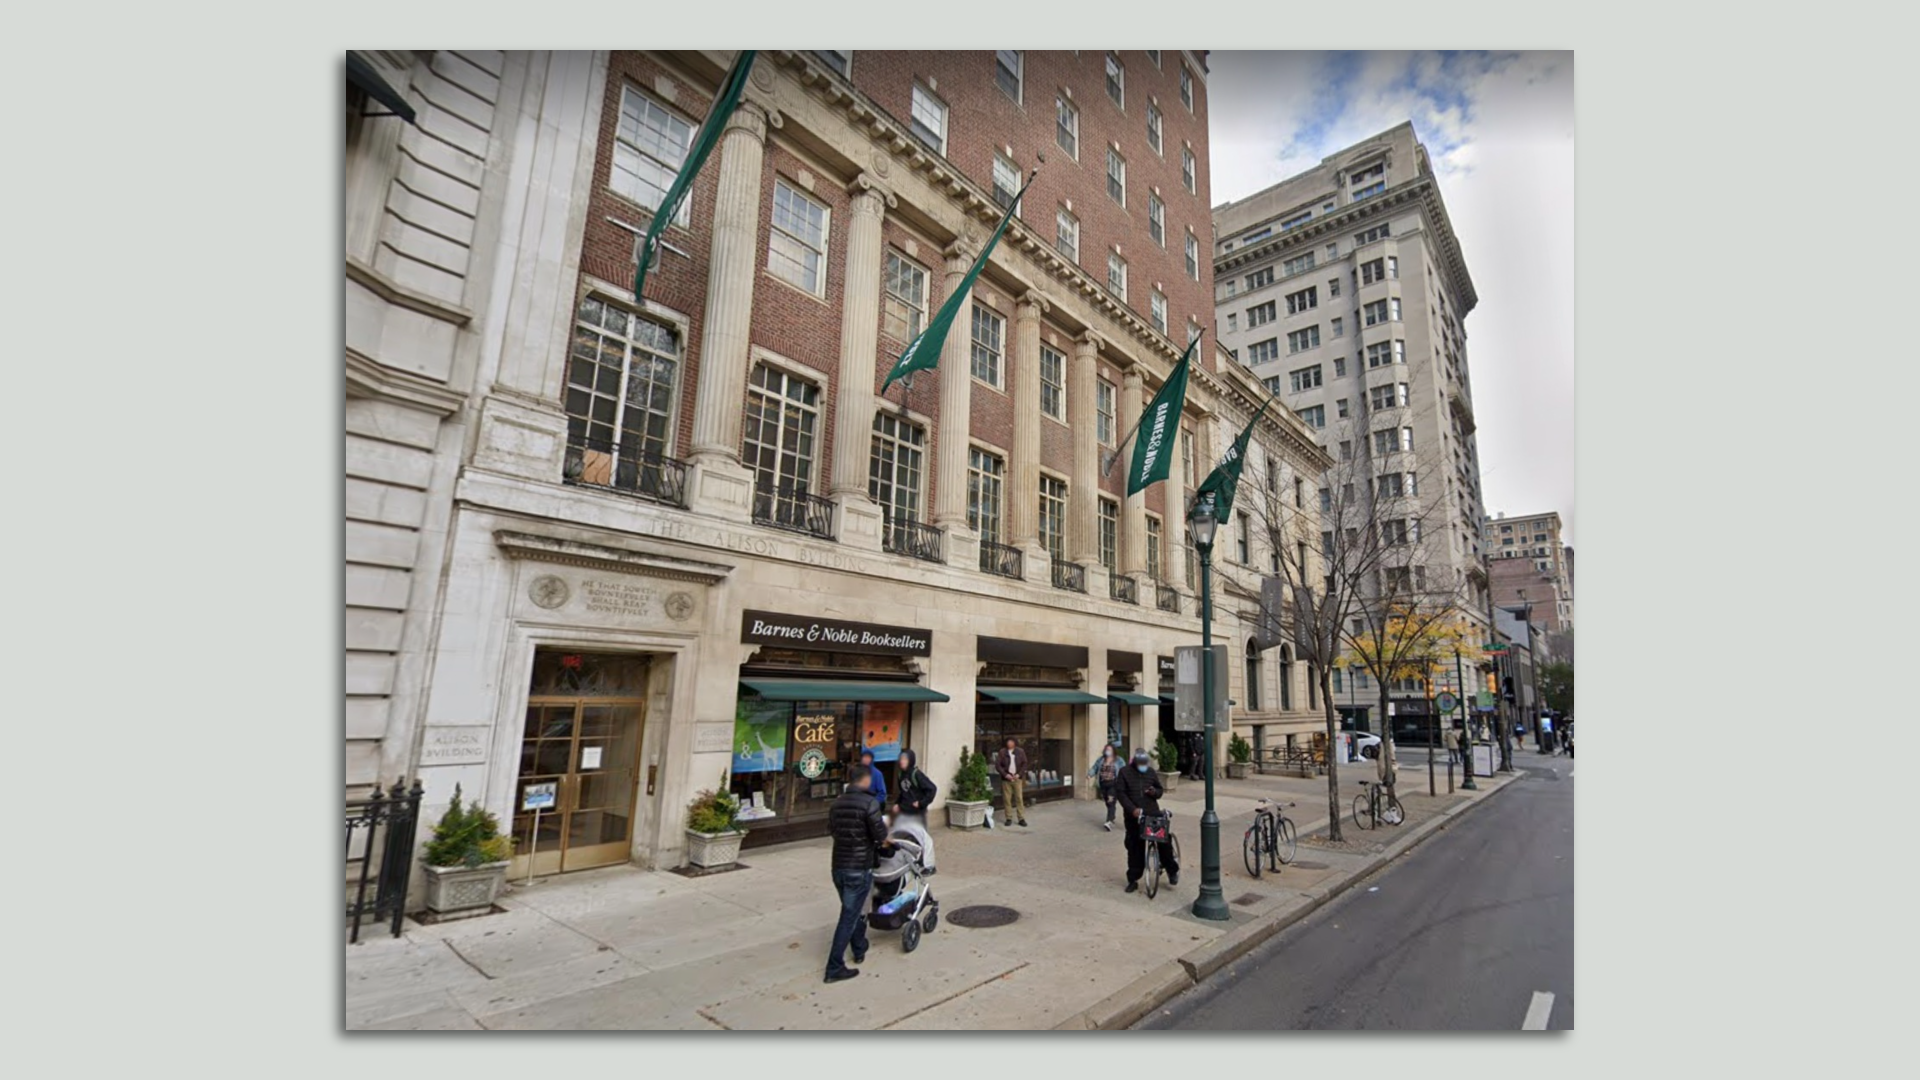 A view of the Barnes and Noble store on Walnut Street in Philadelphia